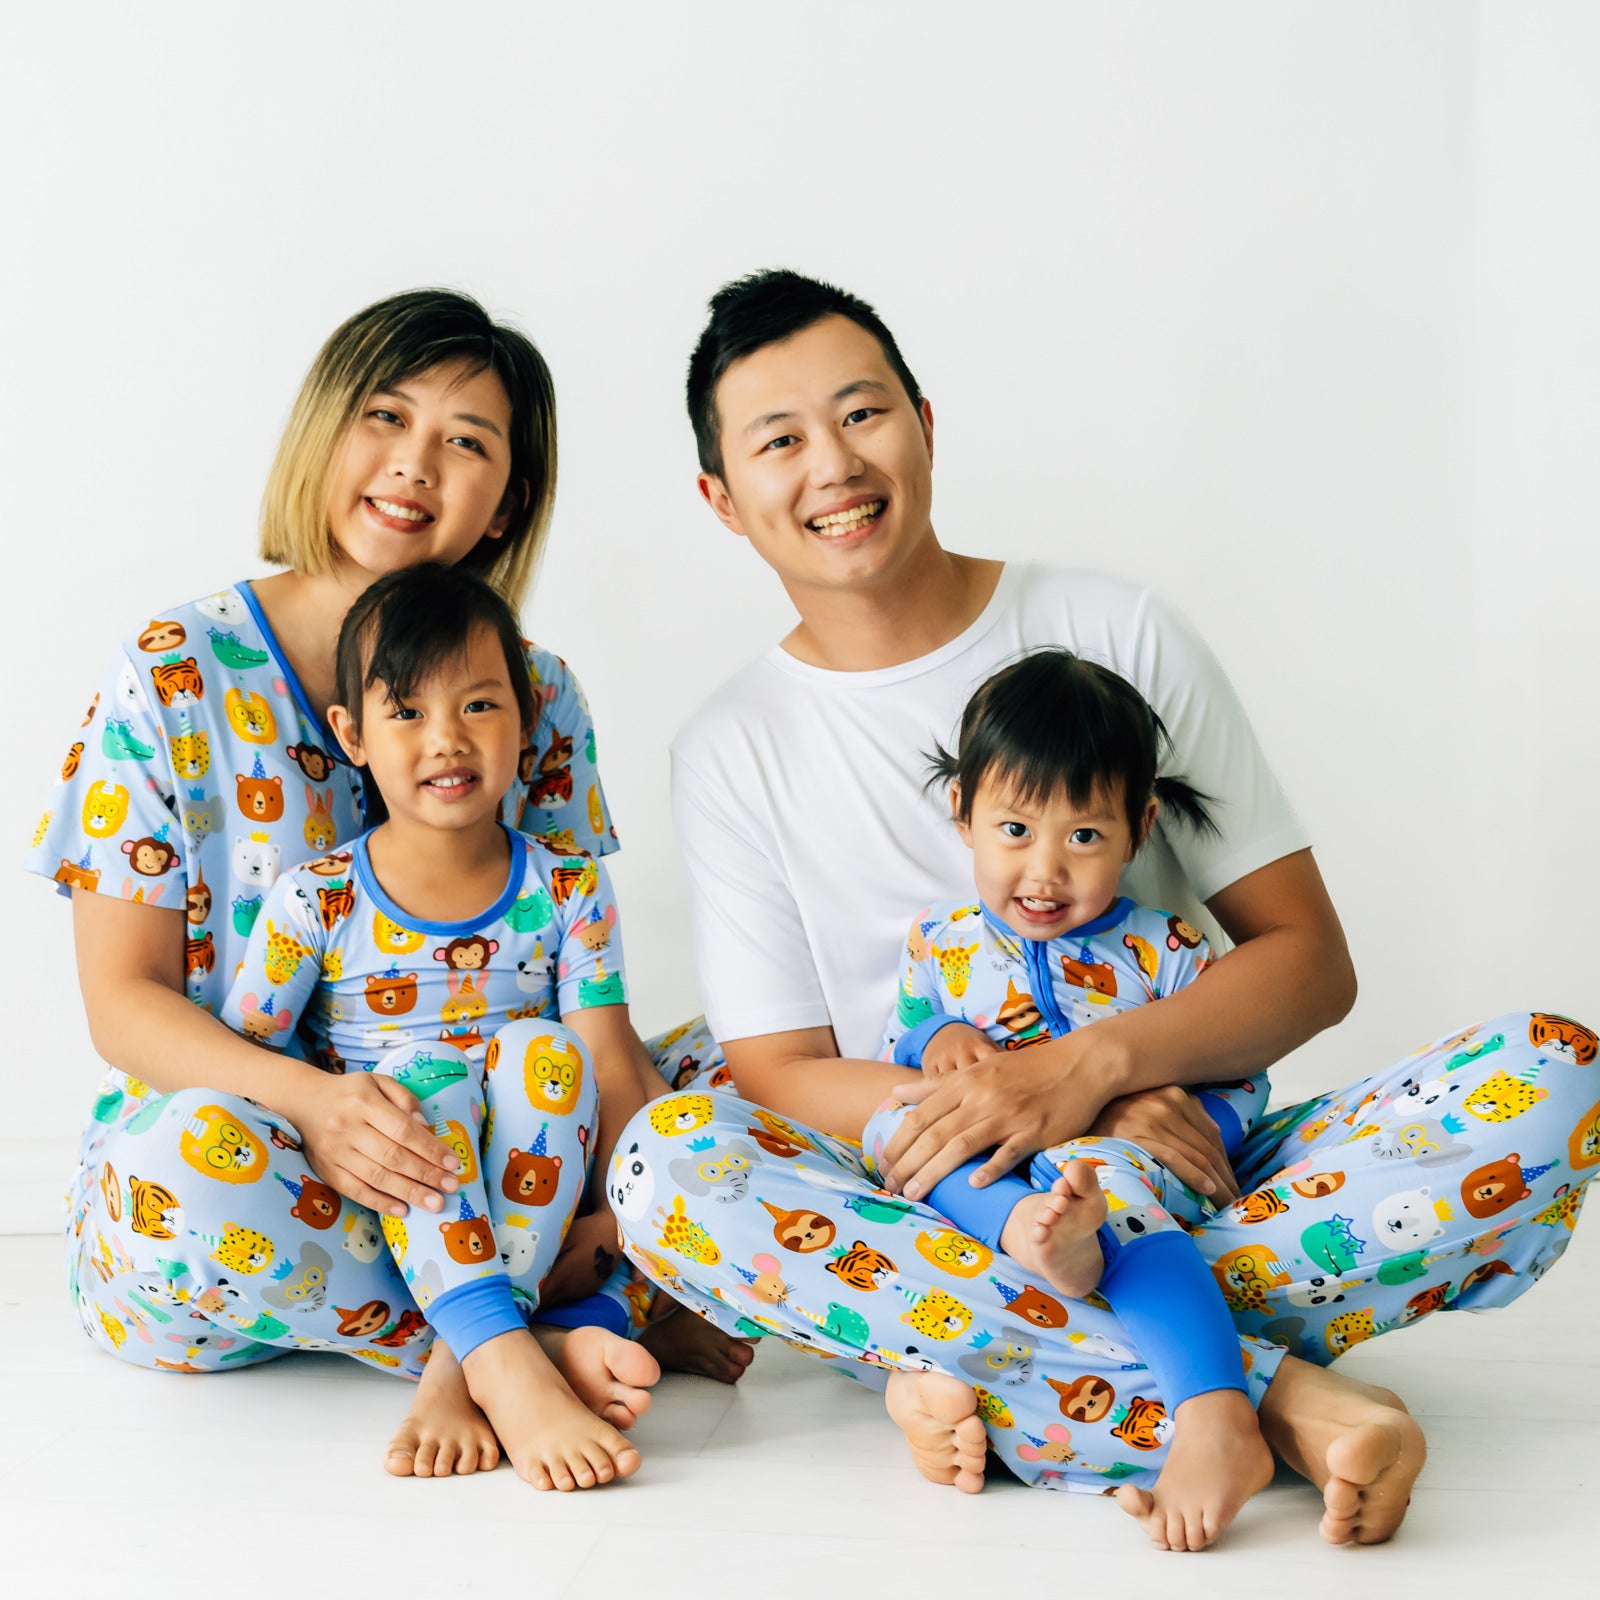 Family of four wearing matching Party Pals pjs. Dad is wearing men's Party Pals men's pj pants paired with a men's bight white top. Mom is wearing Party Pals women's pj top and matching women's pj pants. Kids are wearing Party Pals in two piece and zippy styles.